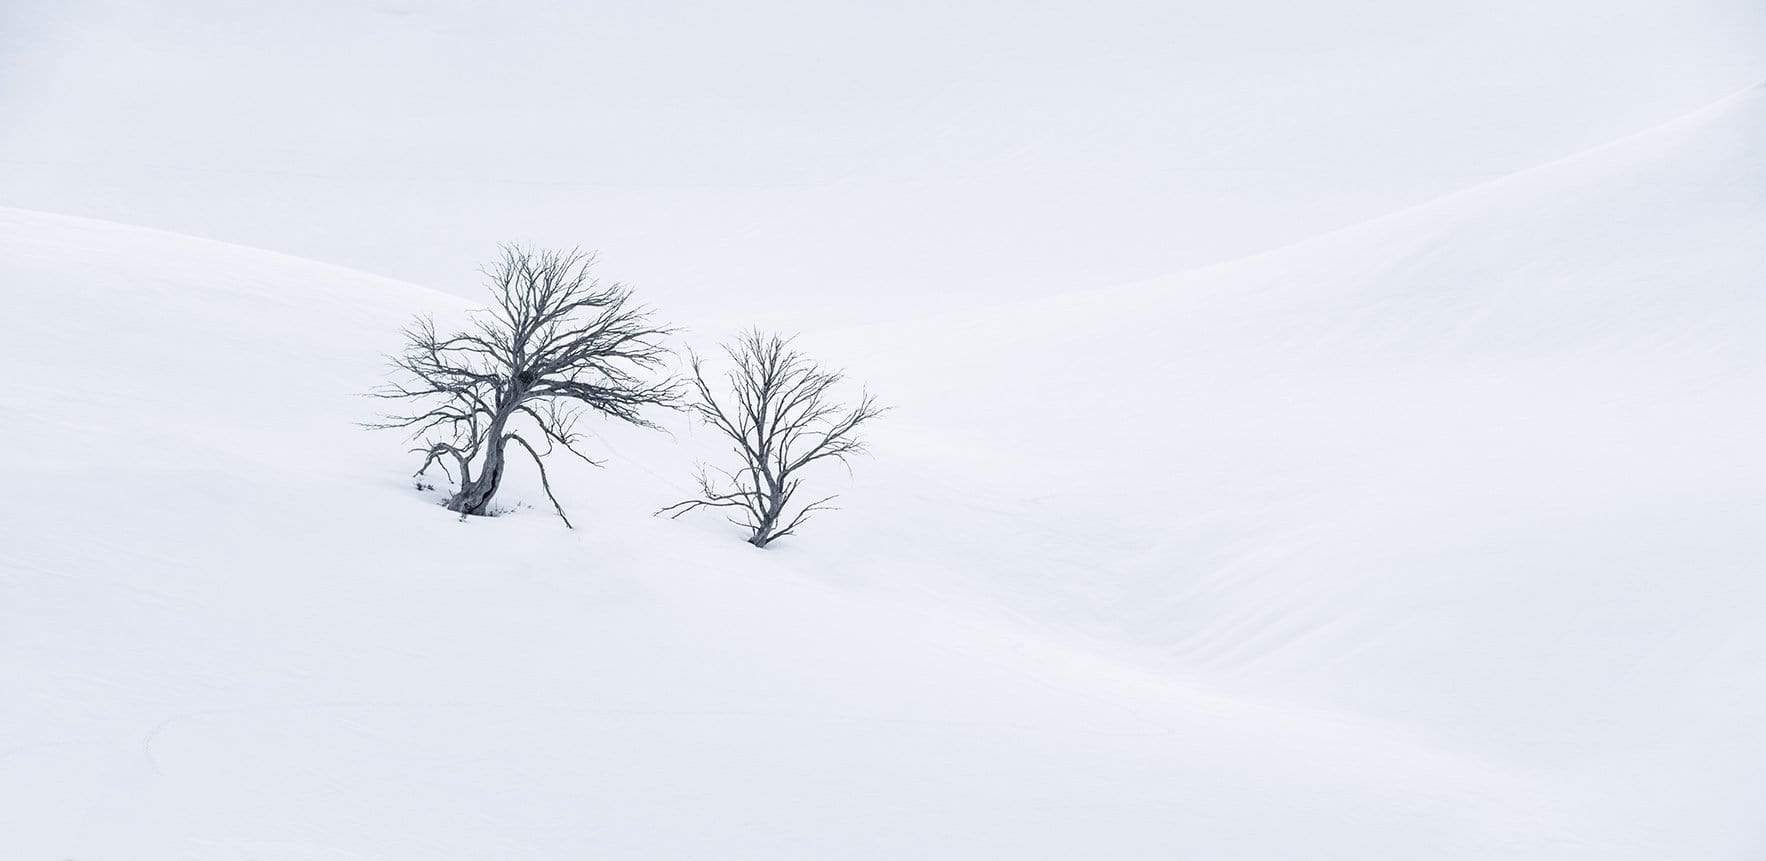 A couple of snow gum trees and a foggy on a snow-covered land, Lone Snow Gums - Snowy Mountains NSW